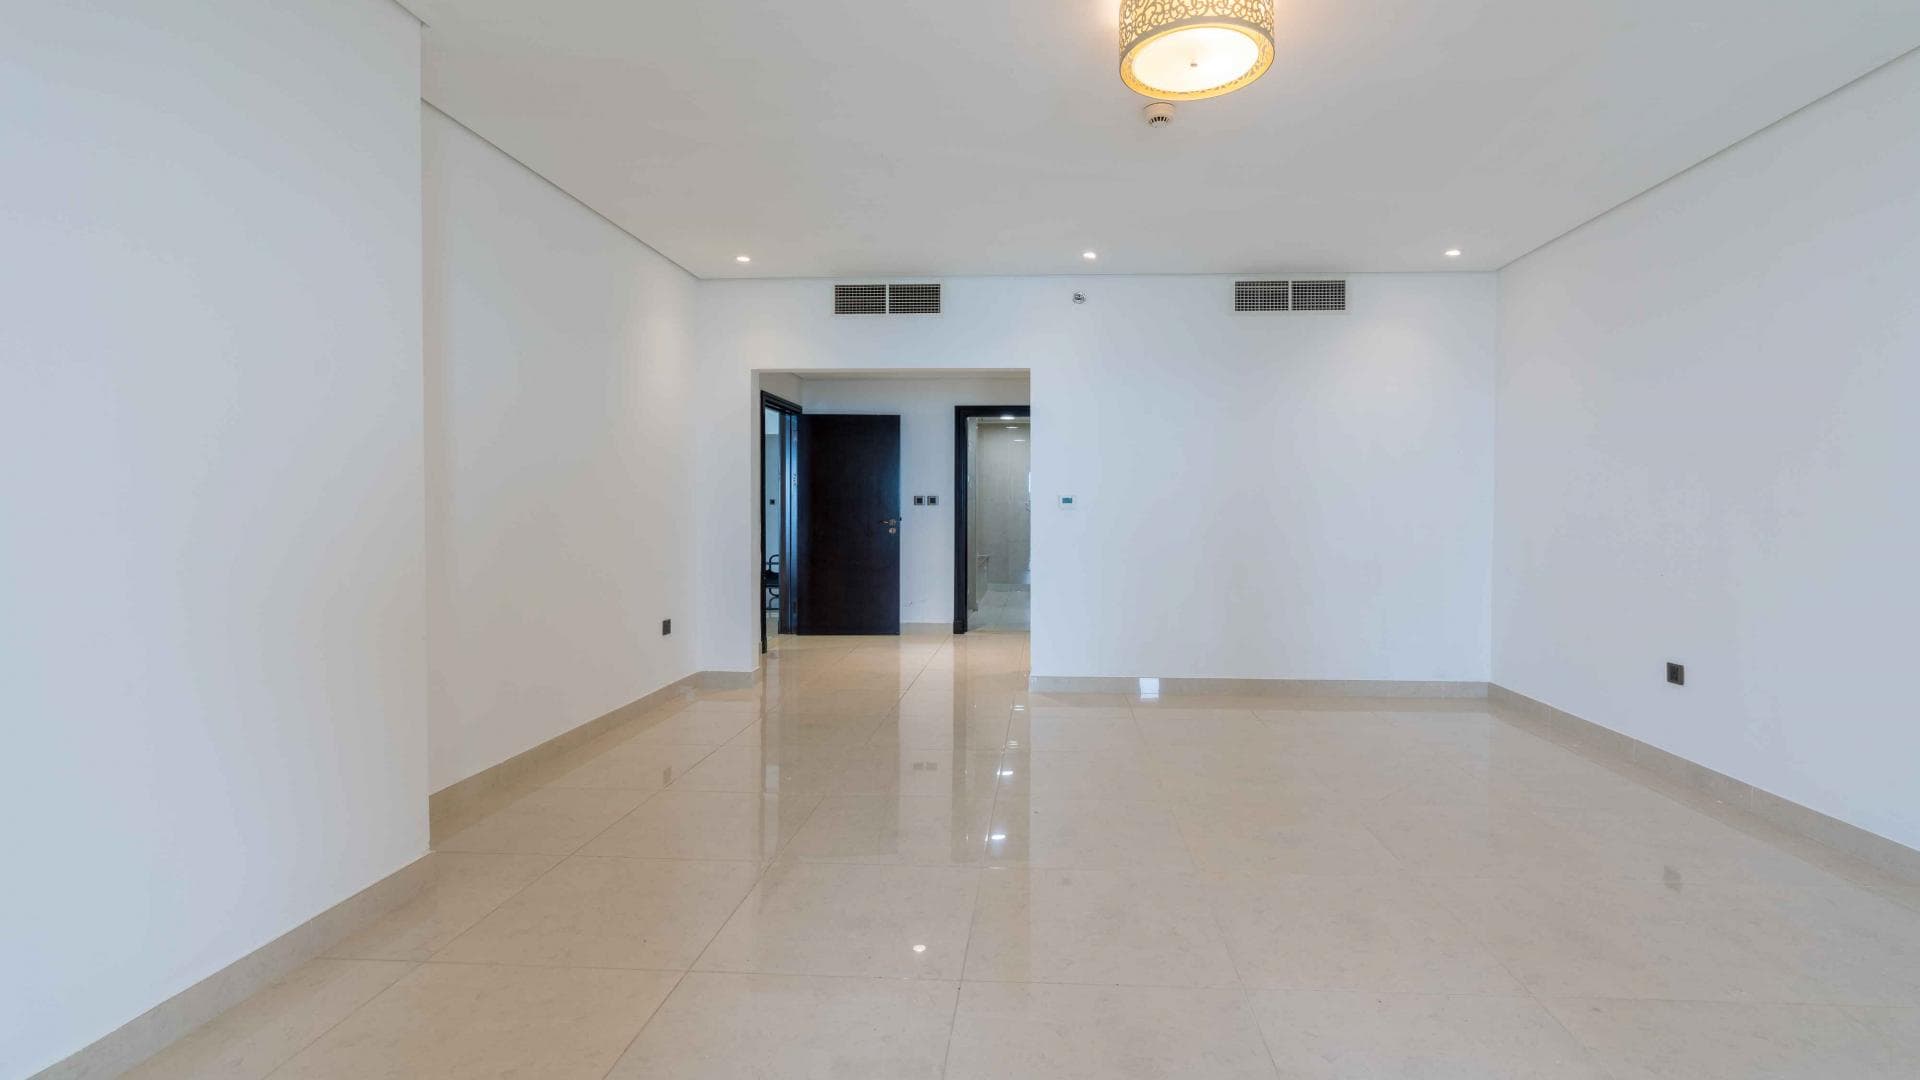 3 Bedroom Apartment For Rent Grand Residence Lp37447 27afbeea52bb8000.jpg